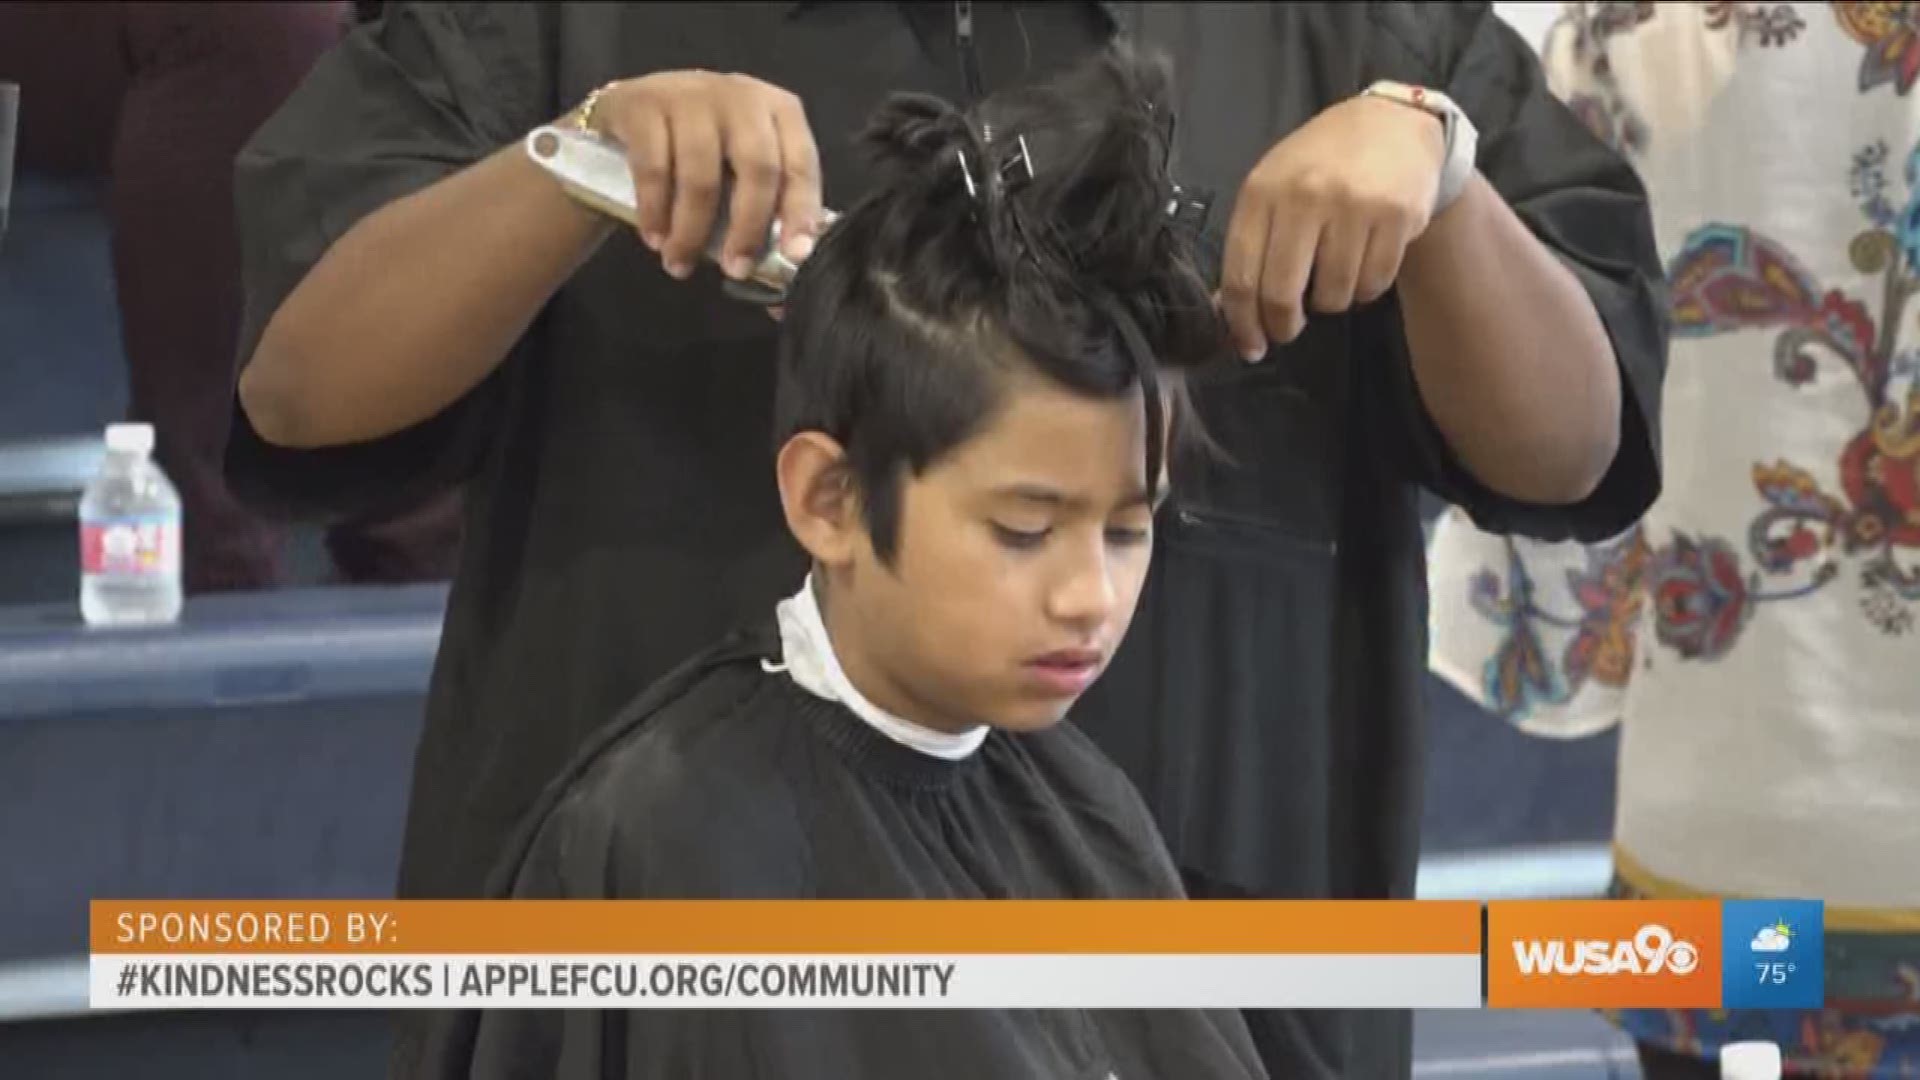 The following segment is sponsored by Apple Federal Credit Union. Apple Federal Credit Union recognized stylists who volunteered their services by giving local kids free back-to-school haircuts. Robert Sowell of Apple Federal Credit Union presented the stylists with gift cards to dinner and free movie tickets to say thank you for spreading kindness in the community. For more information on how Apple Federal Credit Union is promoting kindness in the community go to www.AppleFCU.org/community.